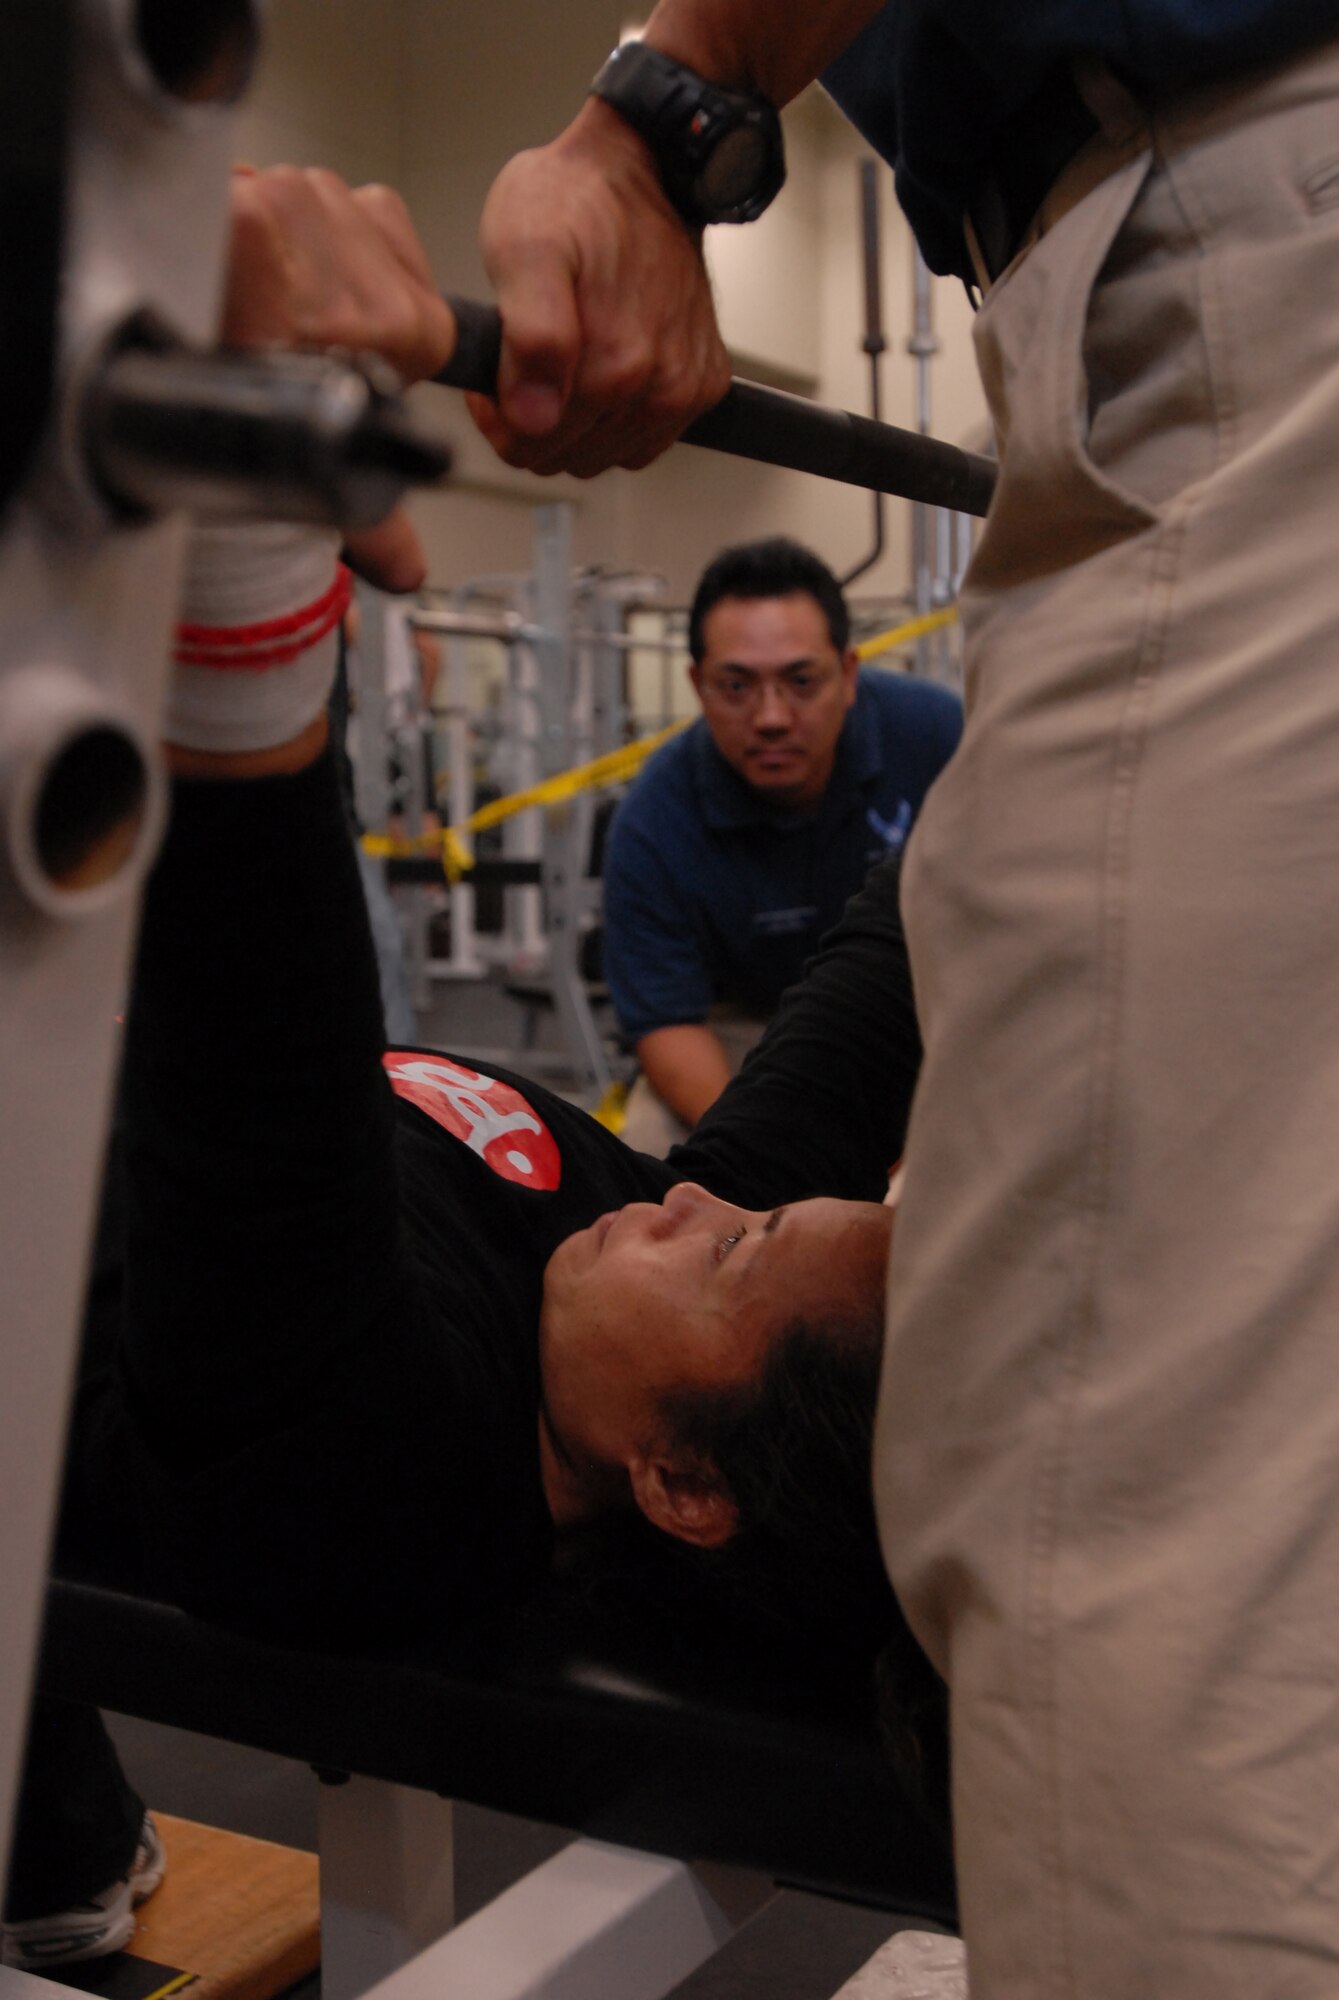 Hirono Arihama prepares for an attempt in the bench press competition at the Risner Fitness Center while spotter Choji Kamoya assists. Ms. Arihama, a Marine Corps Community Services employee assigned to Camp Foster, claimed the top spot in the women’s competition.
(U.S. Air Force photo/Staff Sgt. Darnell Cannady)